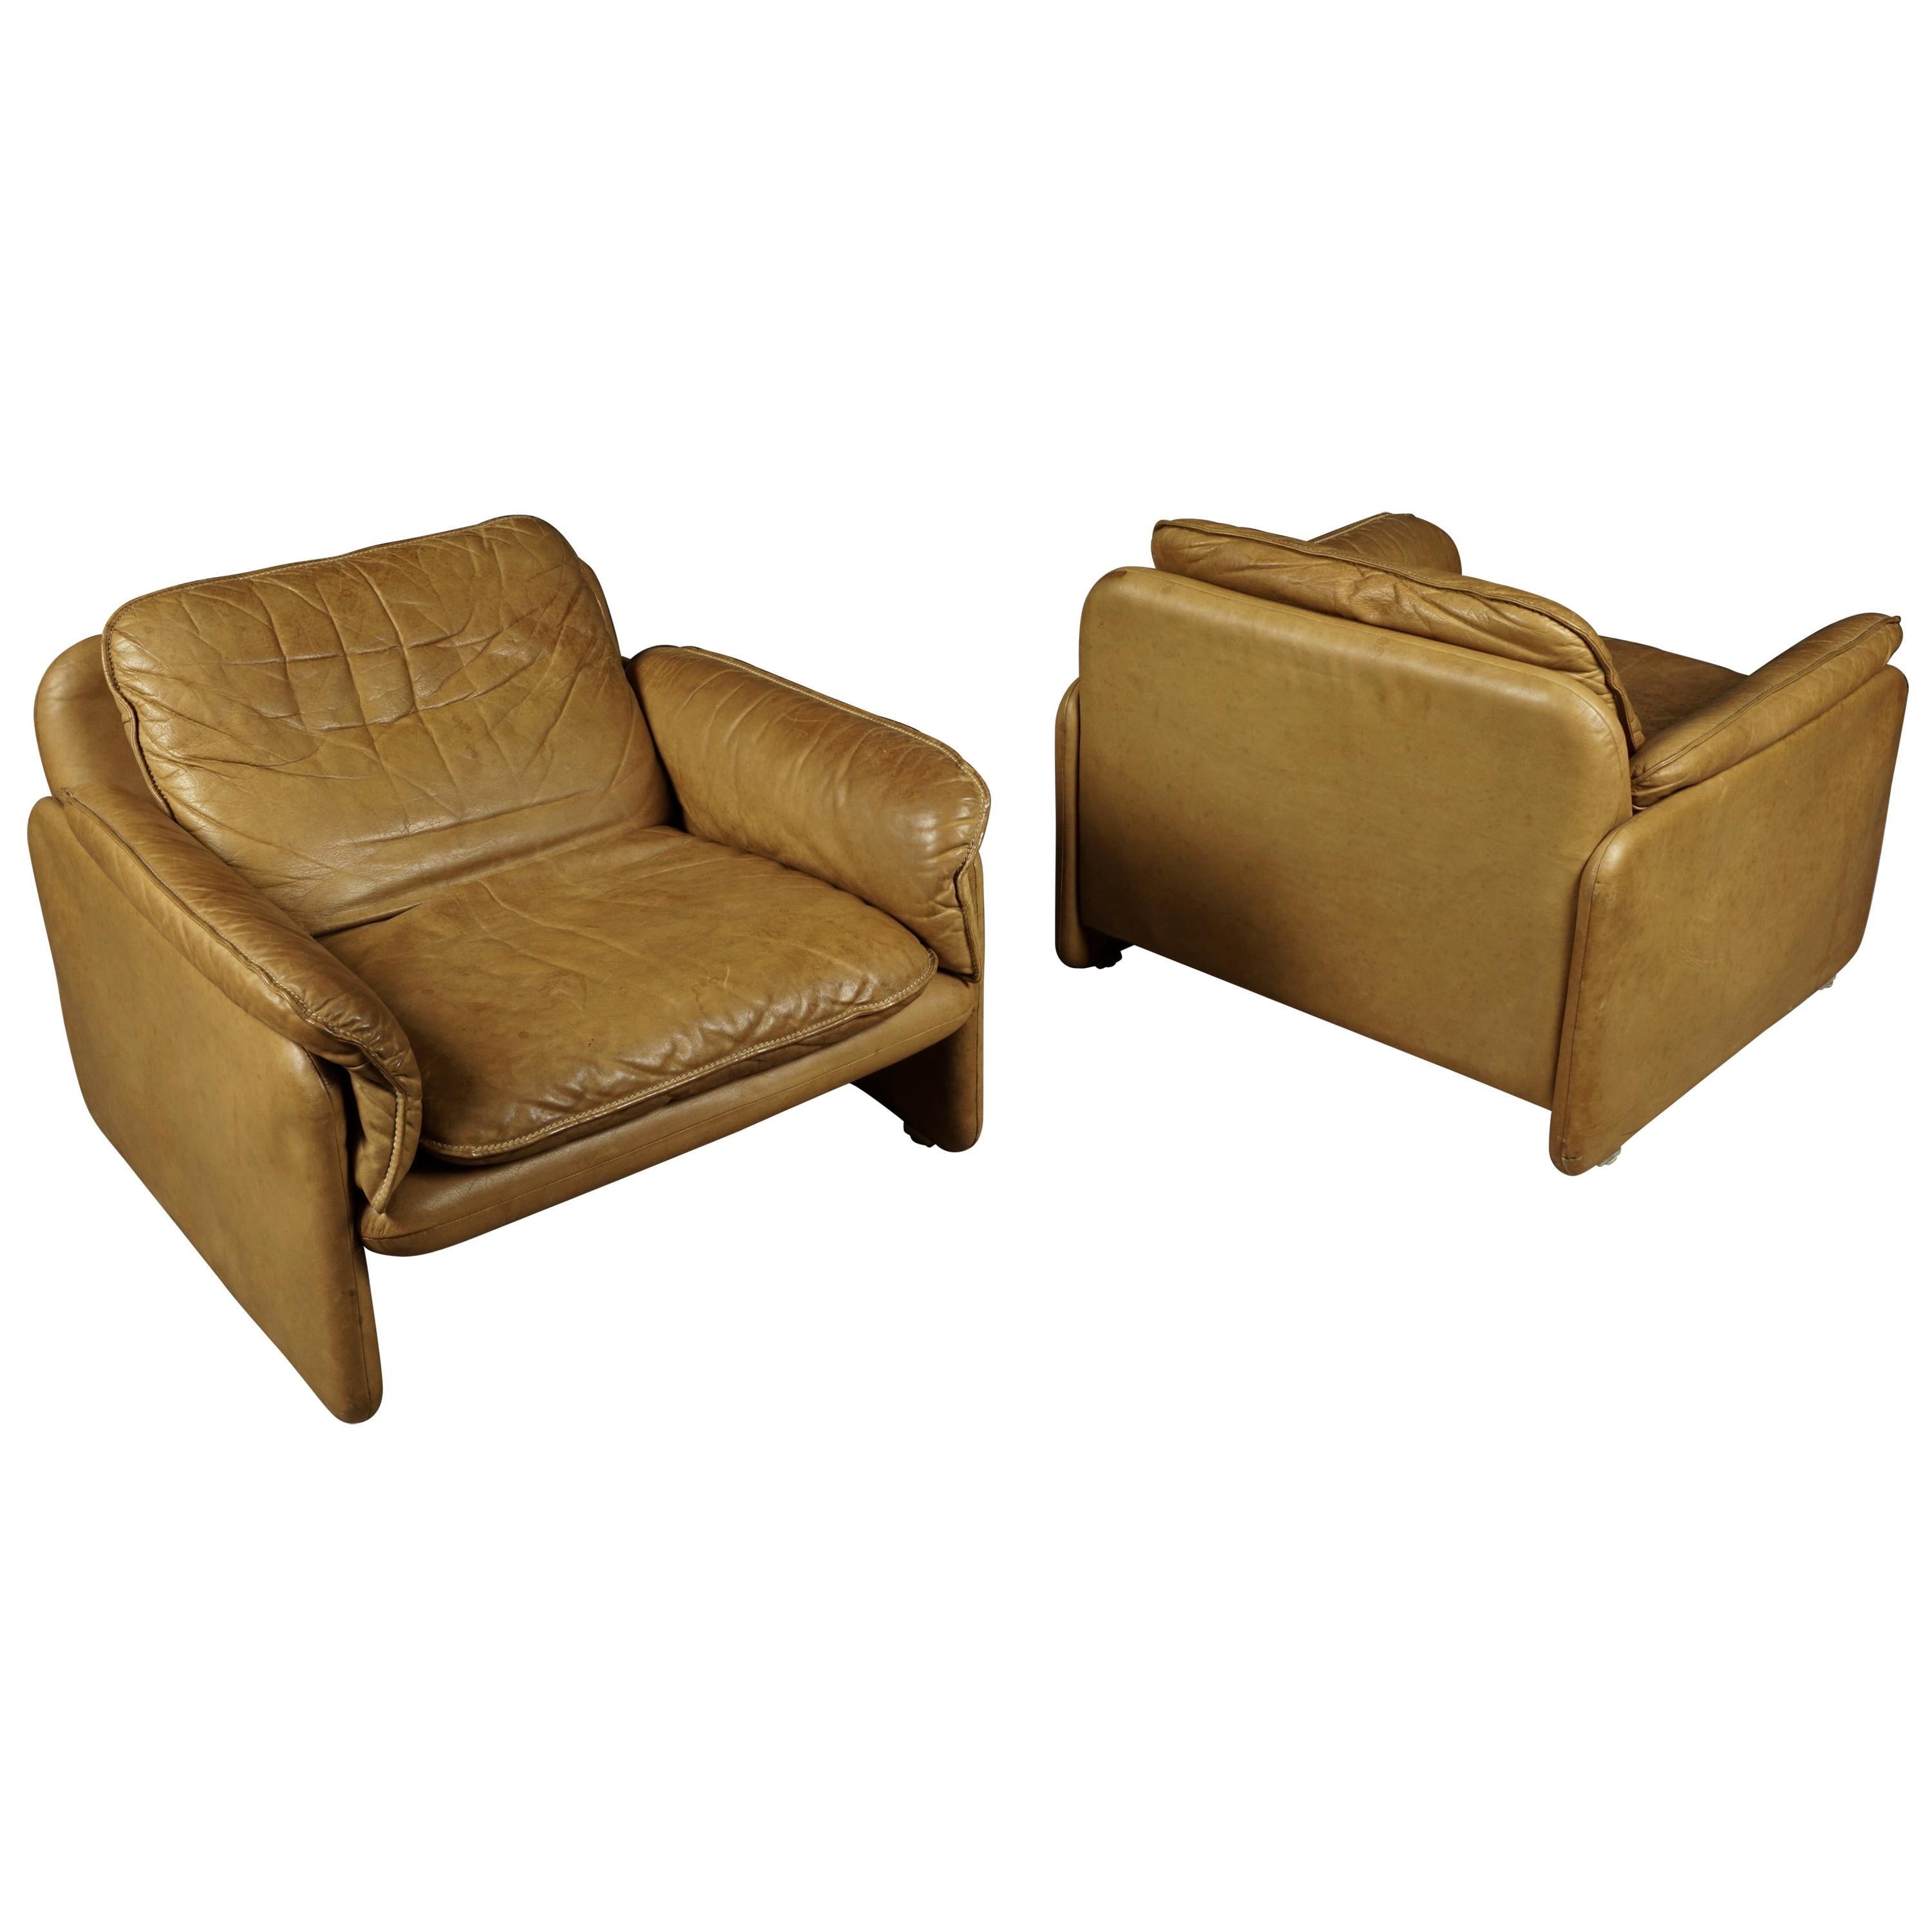 Vintage Pair of Leather DS61 De Sede Lounge Chairs, from Switzerland, circa 1980